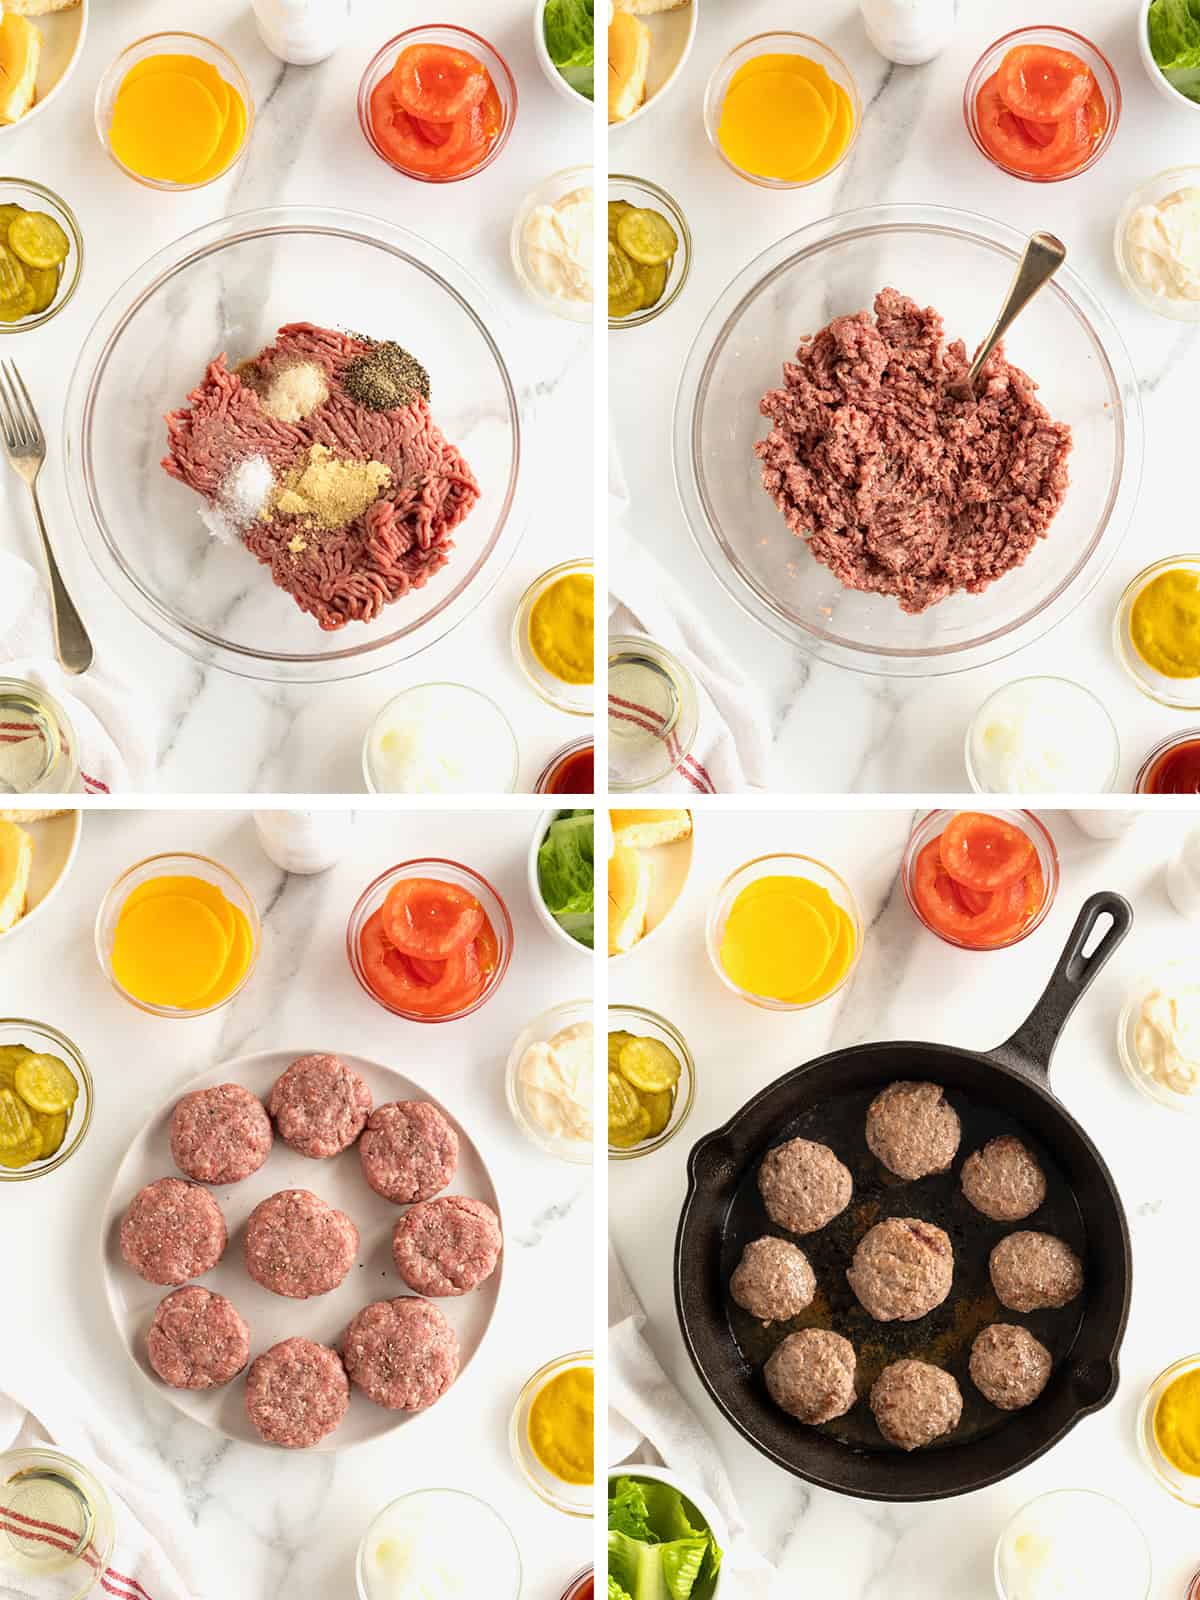 Steps to make sliders in a cast-iron skillet.